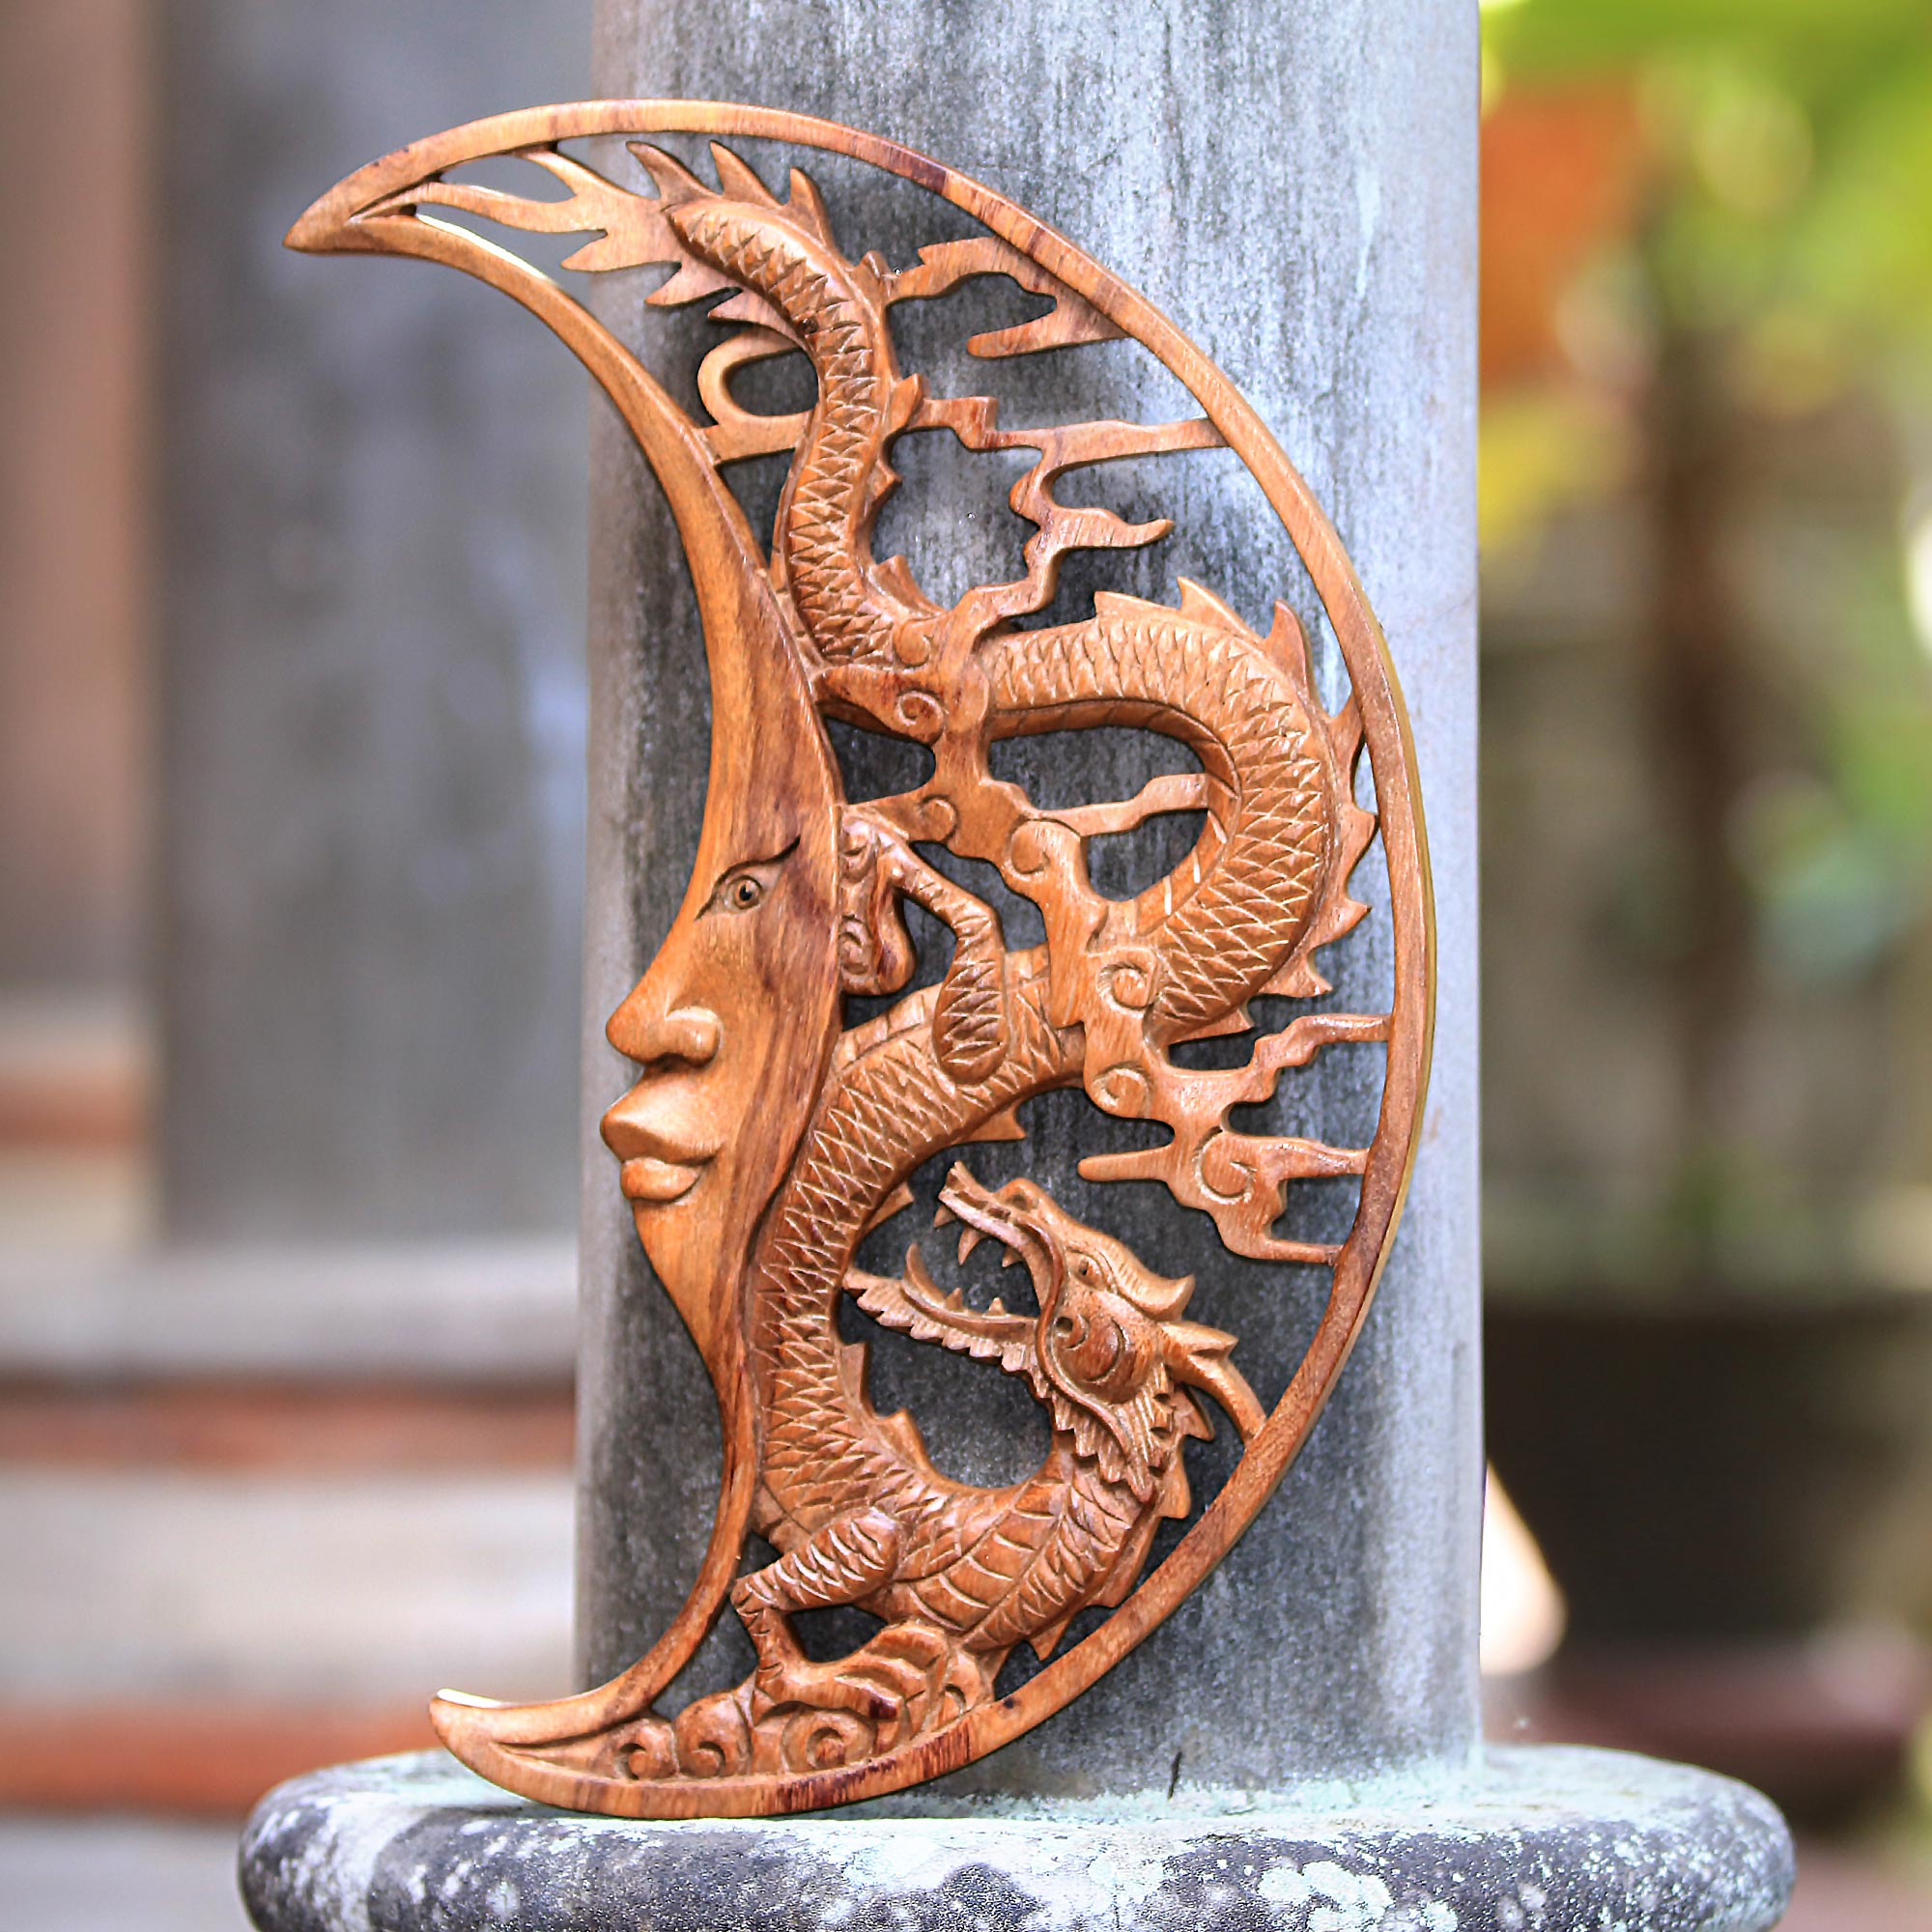 dragon wood carving. dragon is henna tattoo . design carving